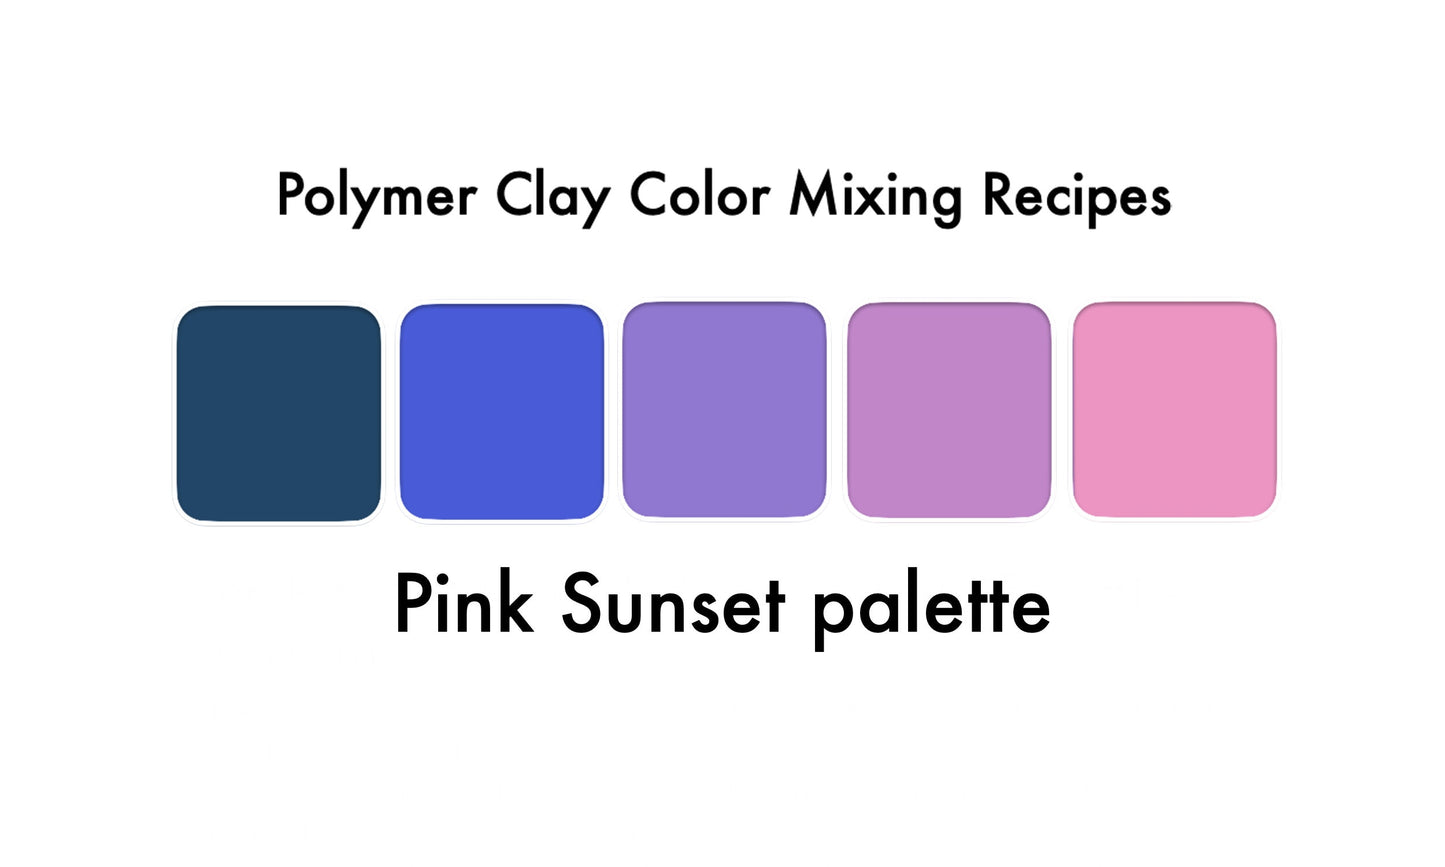 Polymer clay recipes - Pink Sunset